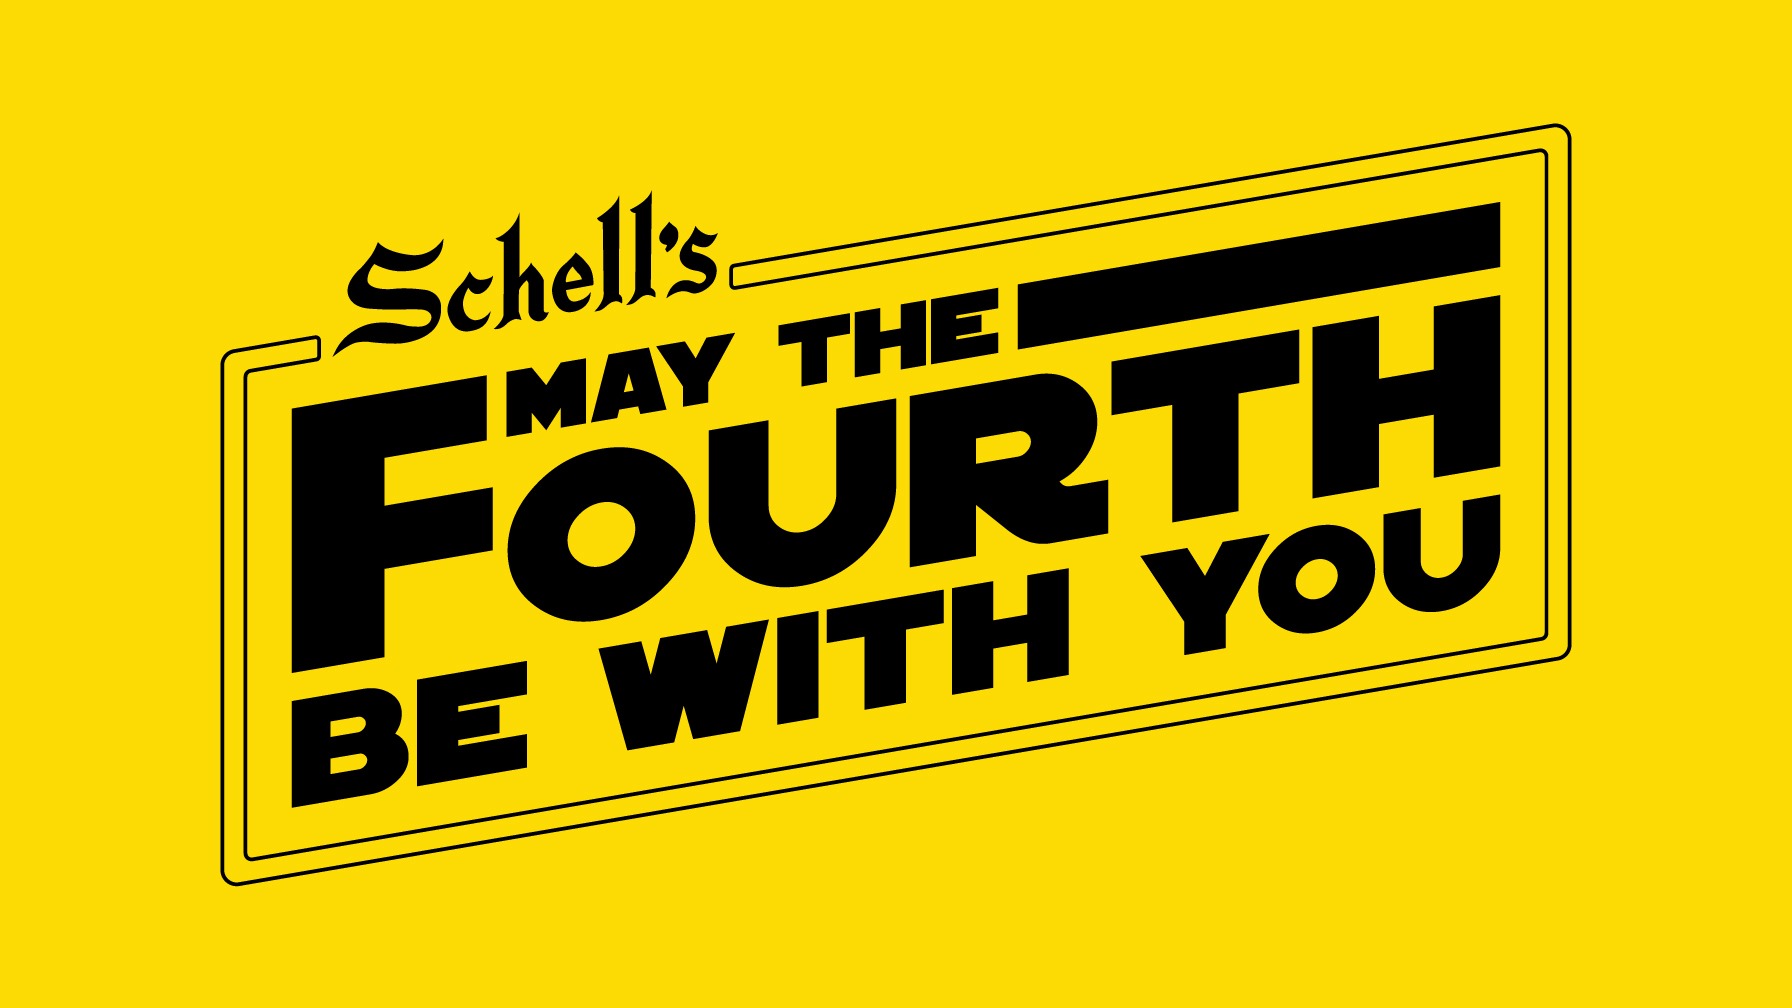 Yellow rectangular background. Black "Star Wars" looking logo that says "Schell's May the Fourth Be With You" in black.